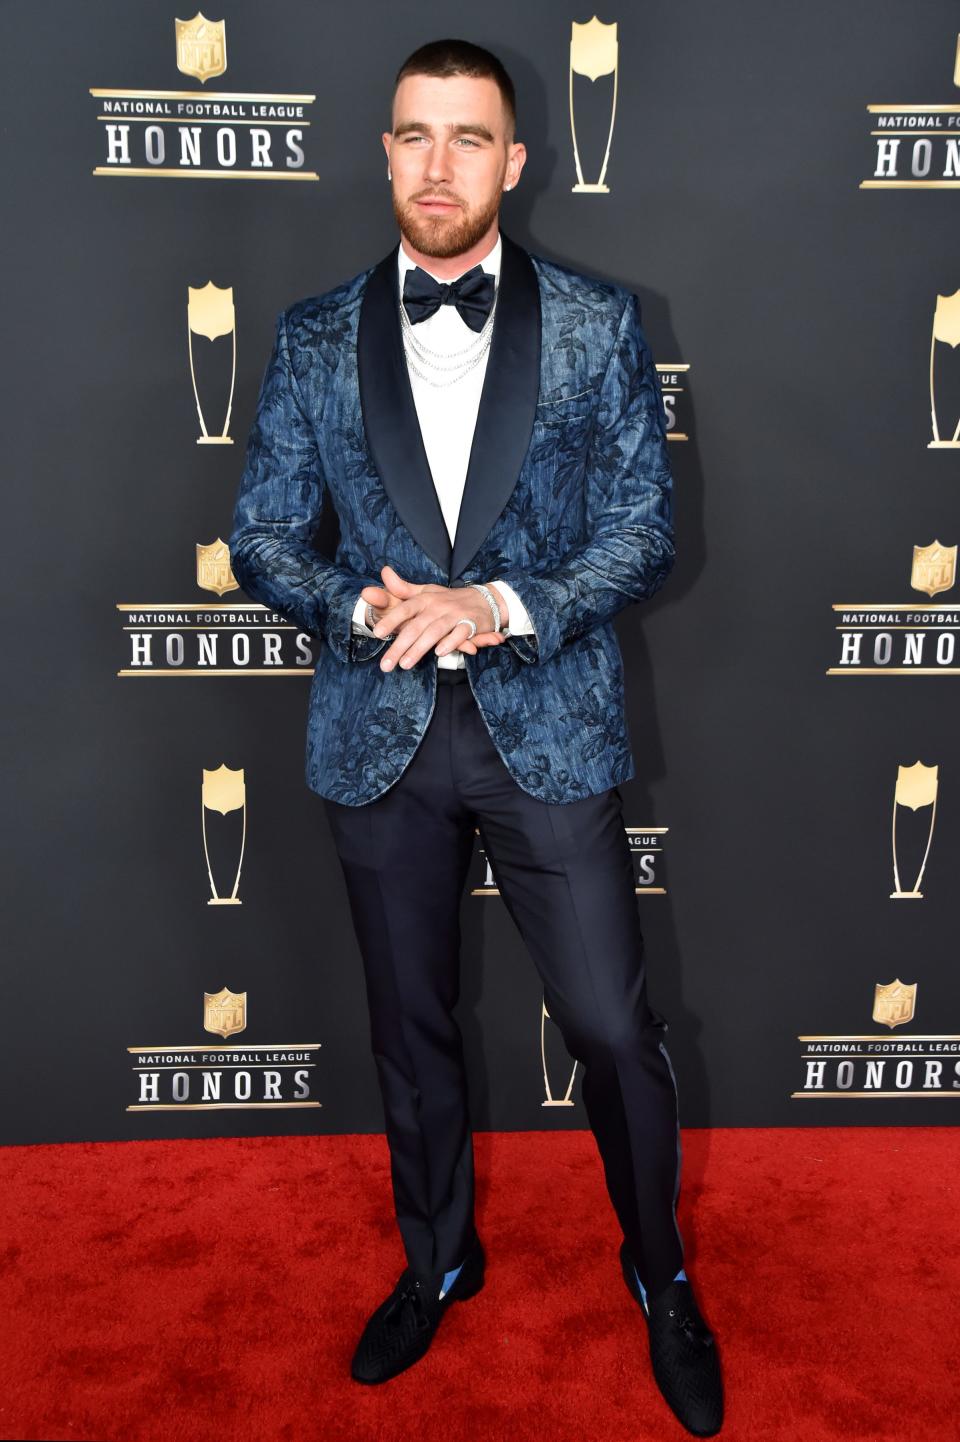 NFL player Travis Kelce wearing a patterned blue suit jacket, a bow-tie, and navy slacks on the red carpet at the NFL Honors.